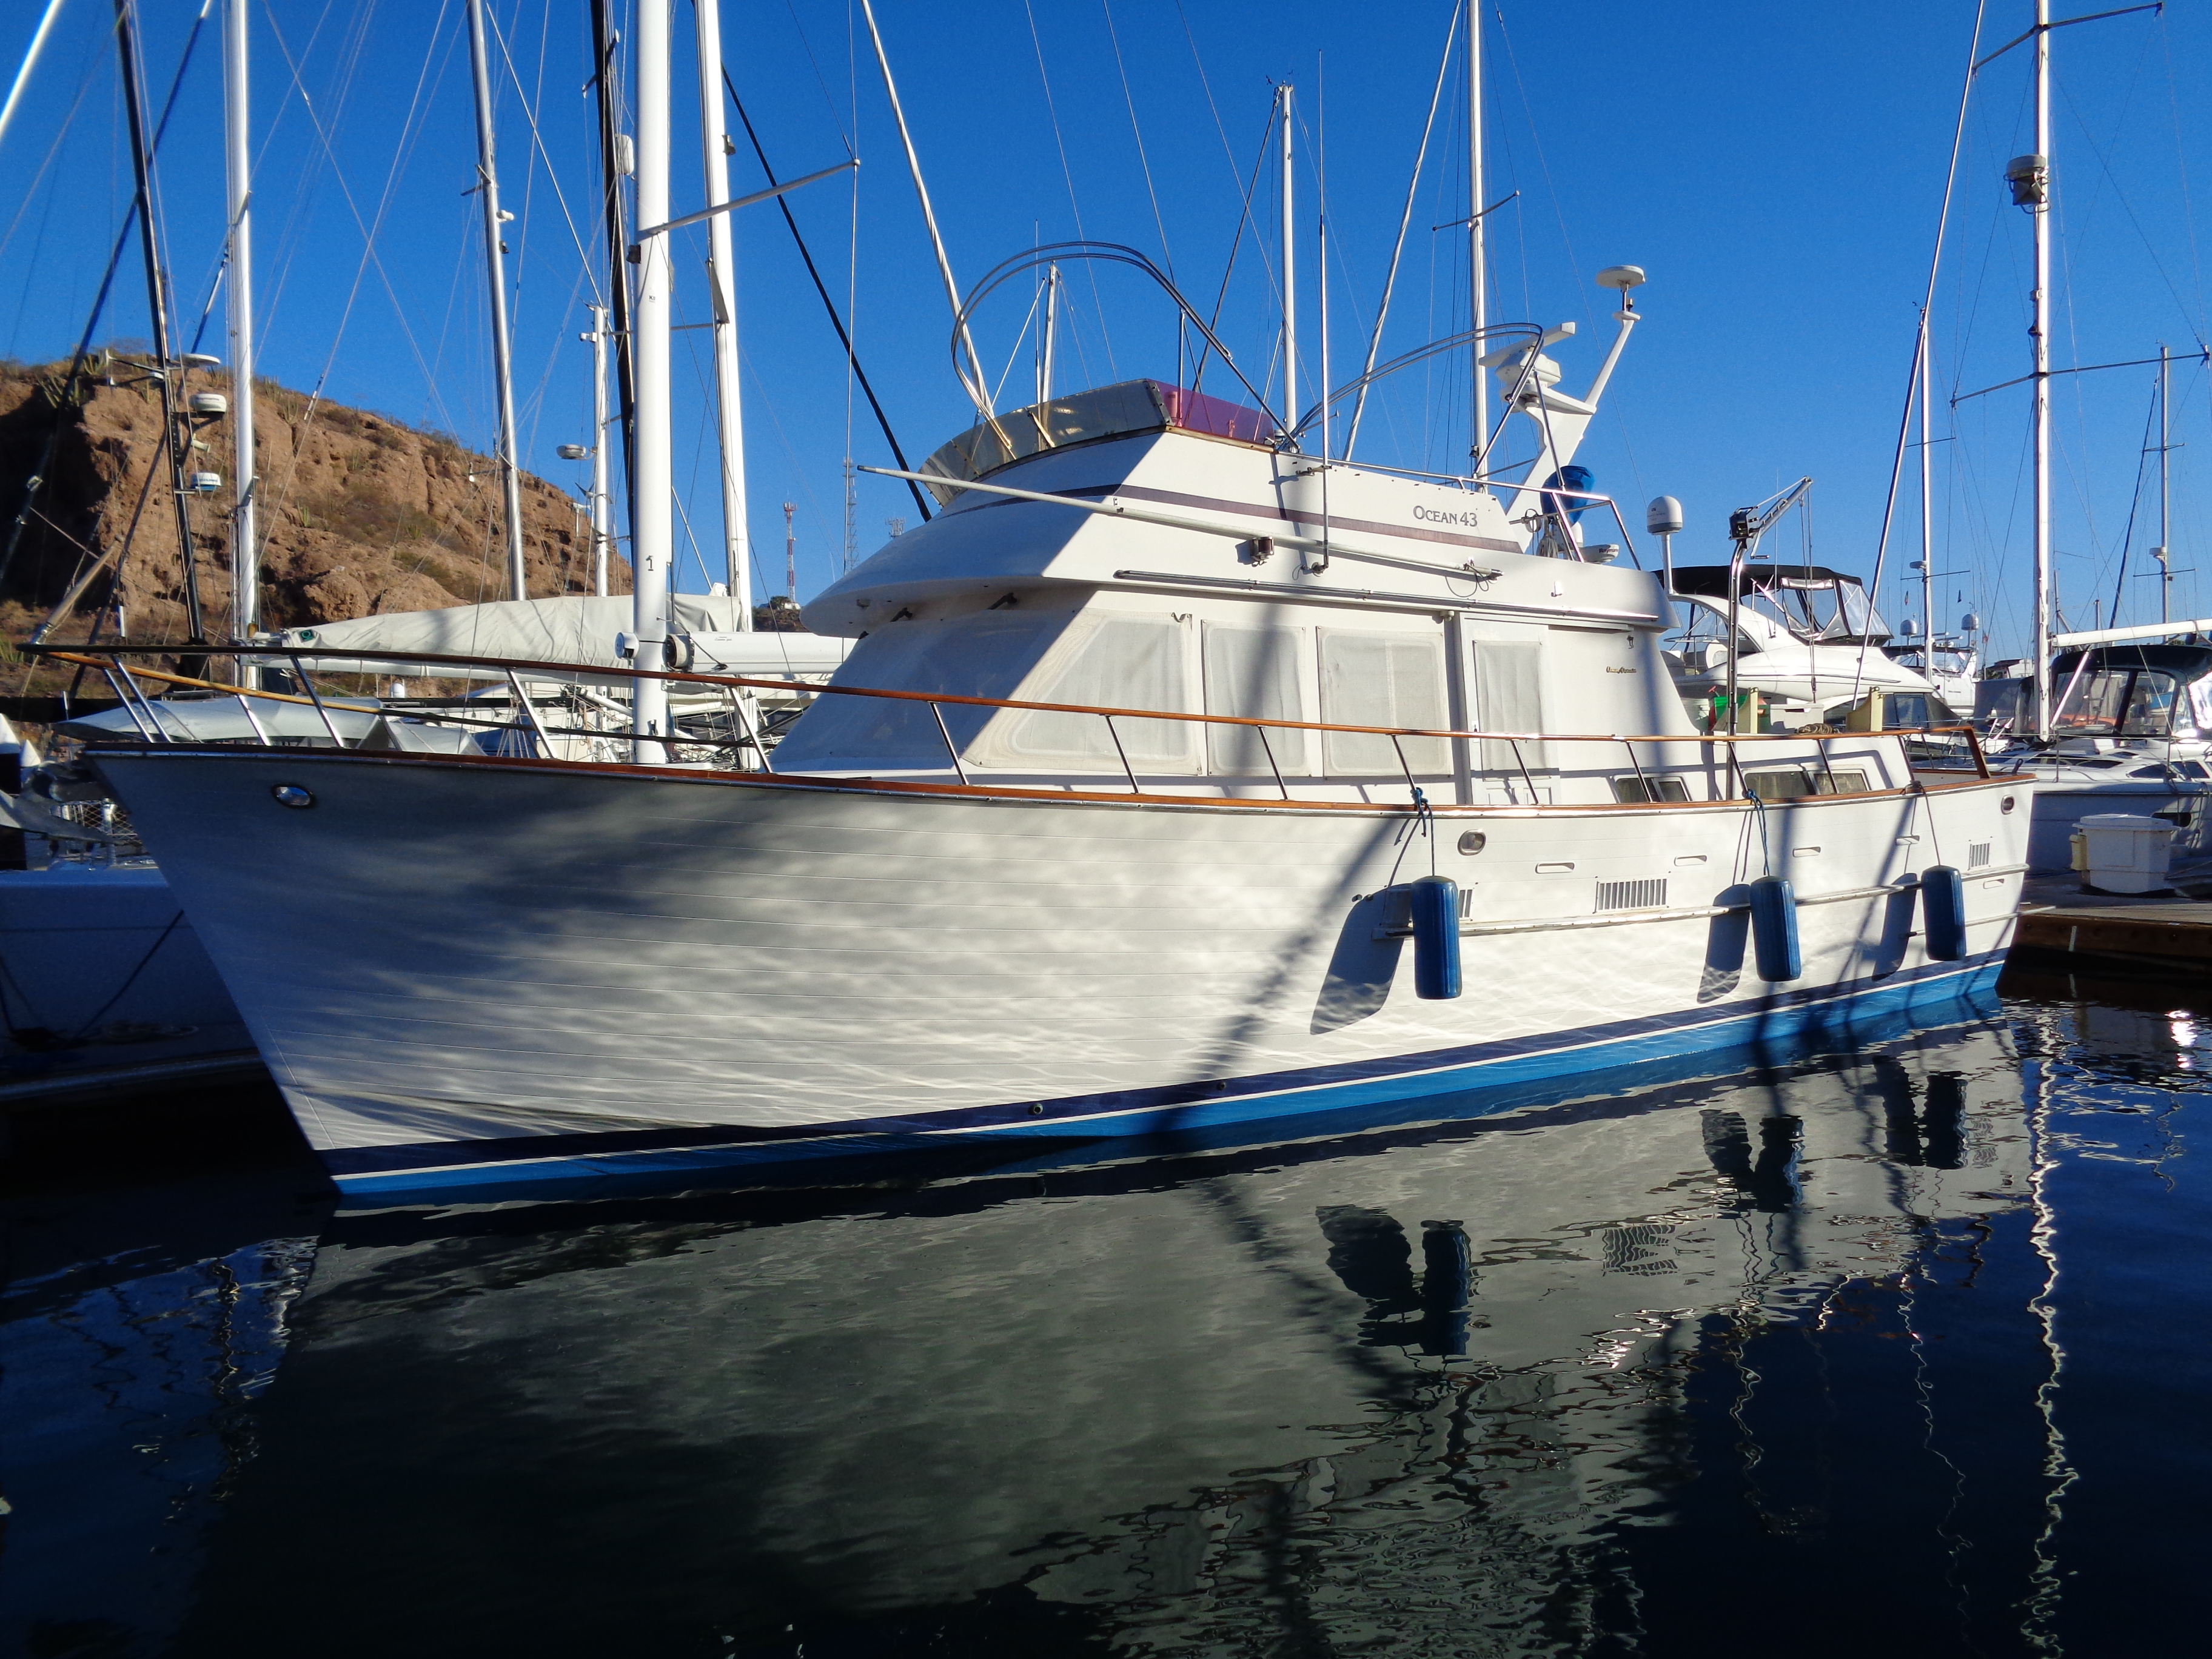 1985 Ocean alexander 43 Power boat for sale in Mexico - image 1 